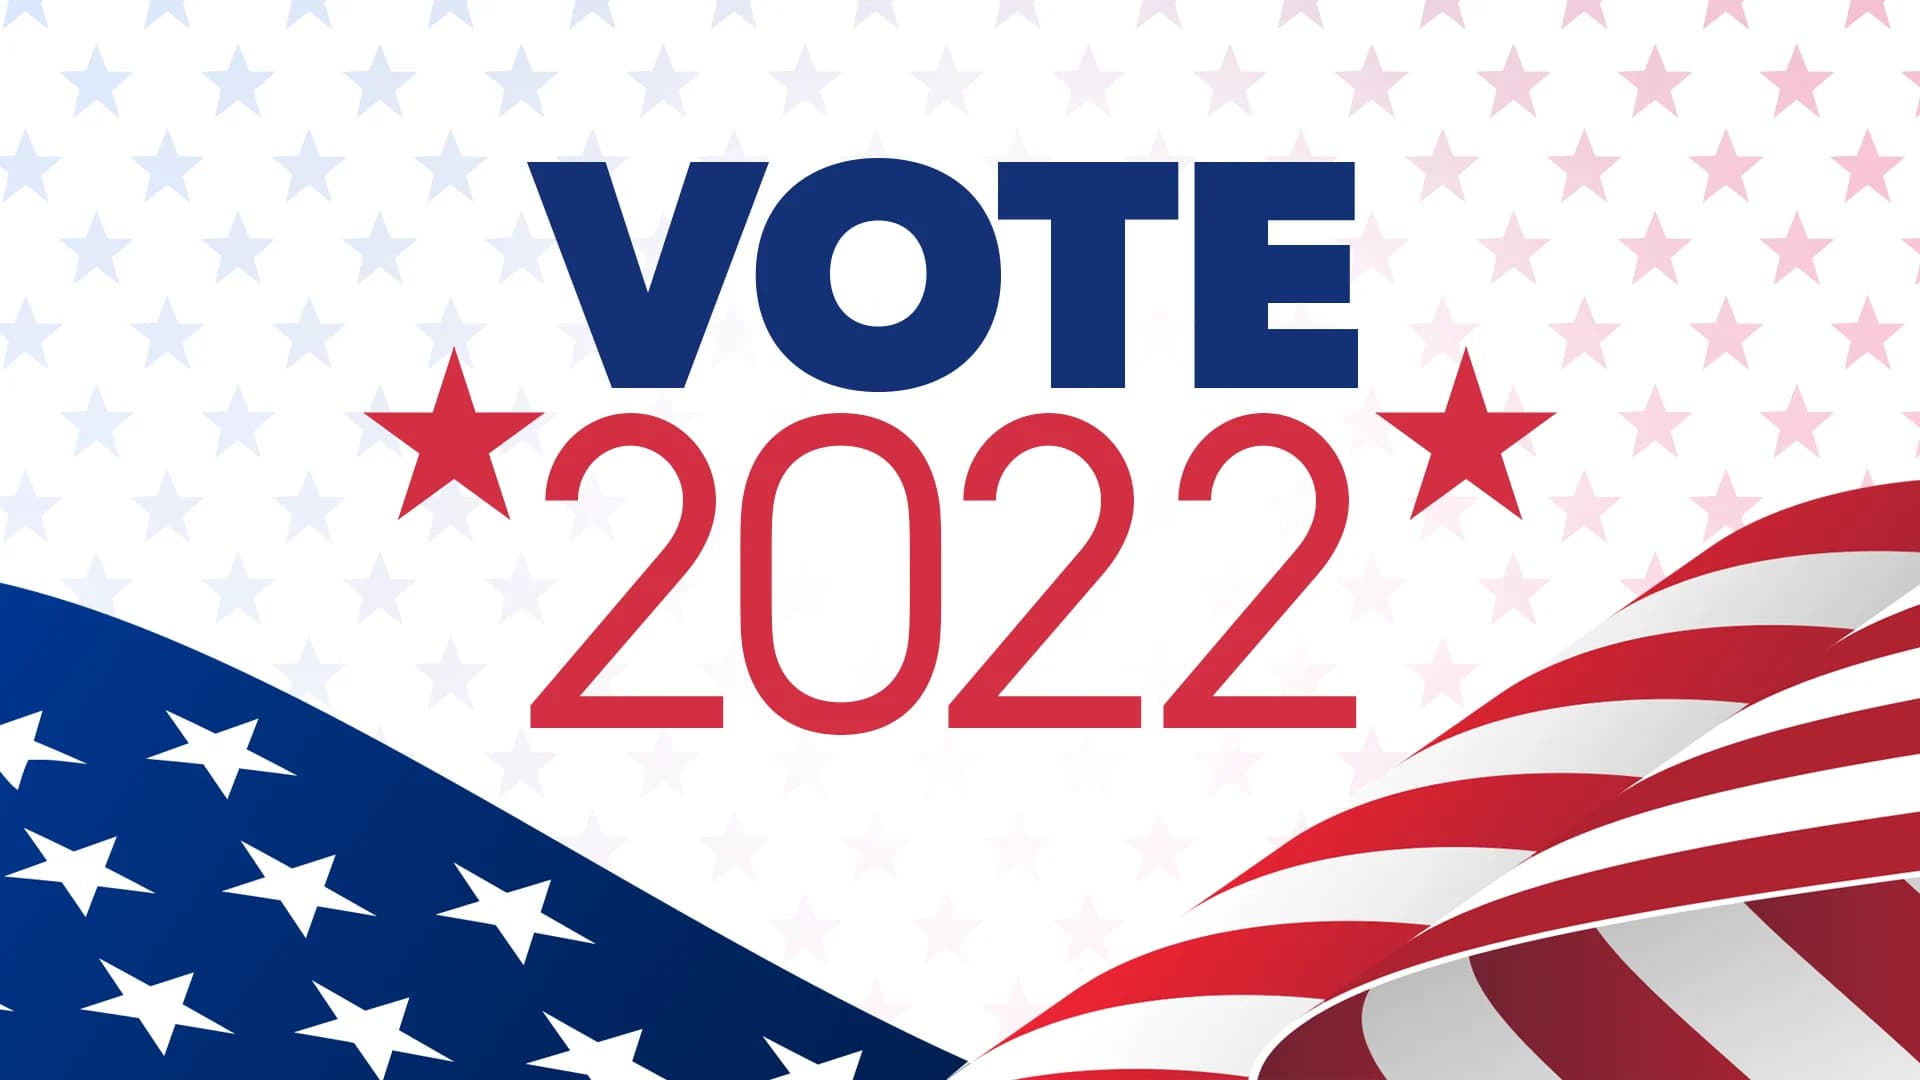 NEW JERSEY VOTE 2022: Complete results and coverage